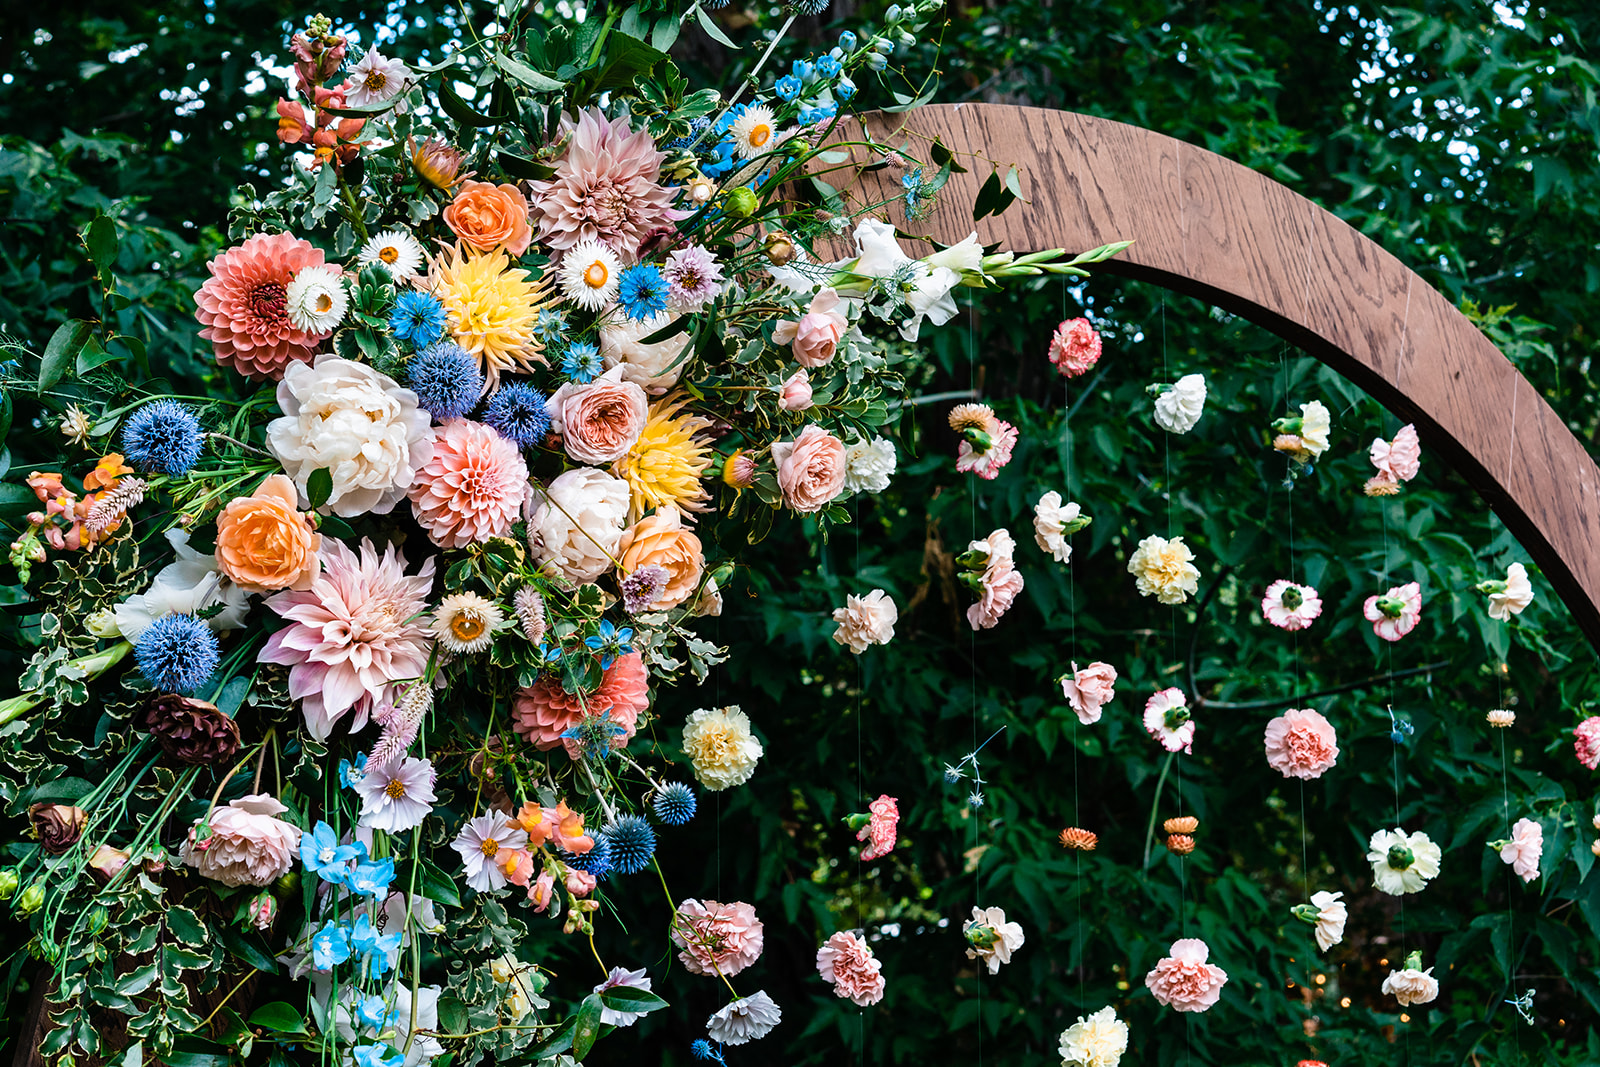 A colorful floral arrangement on a circular wooden arch with flowers suspended in mid-air against a backdrop of green foliage that sparks incredible wedding ceremony arch ideas.